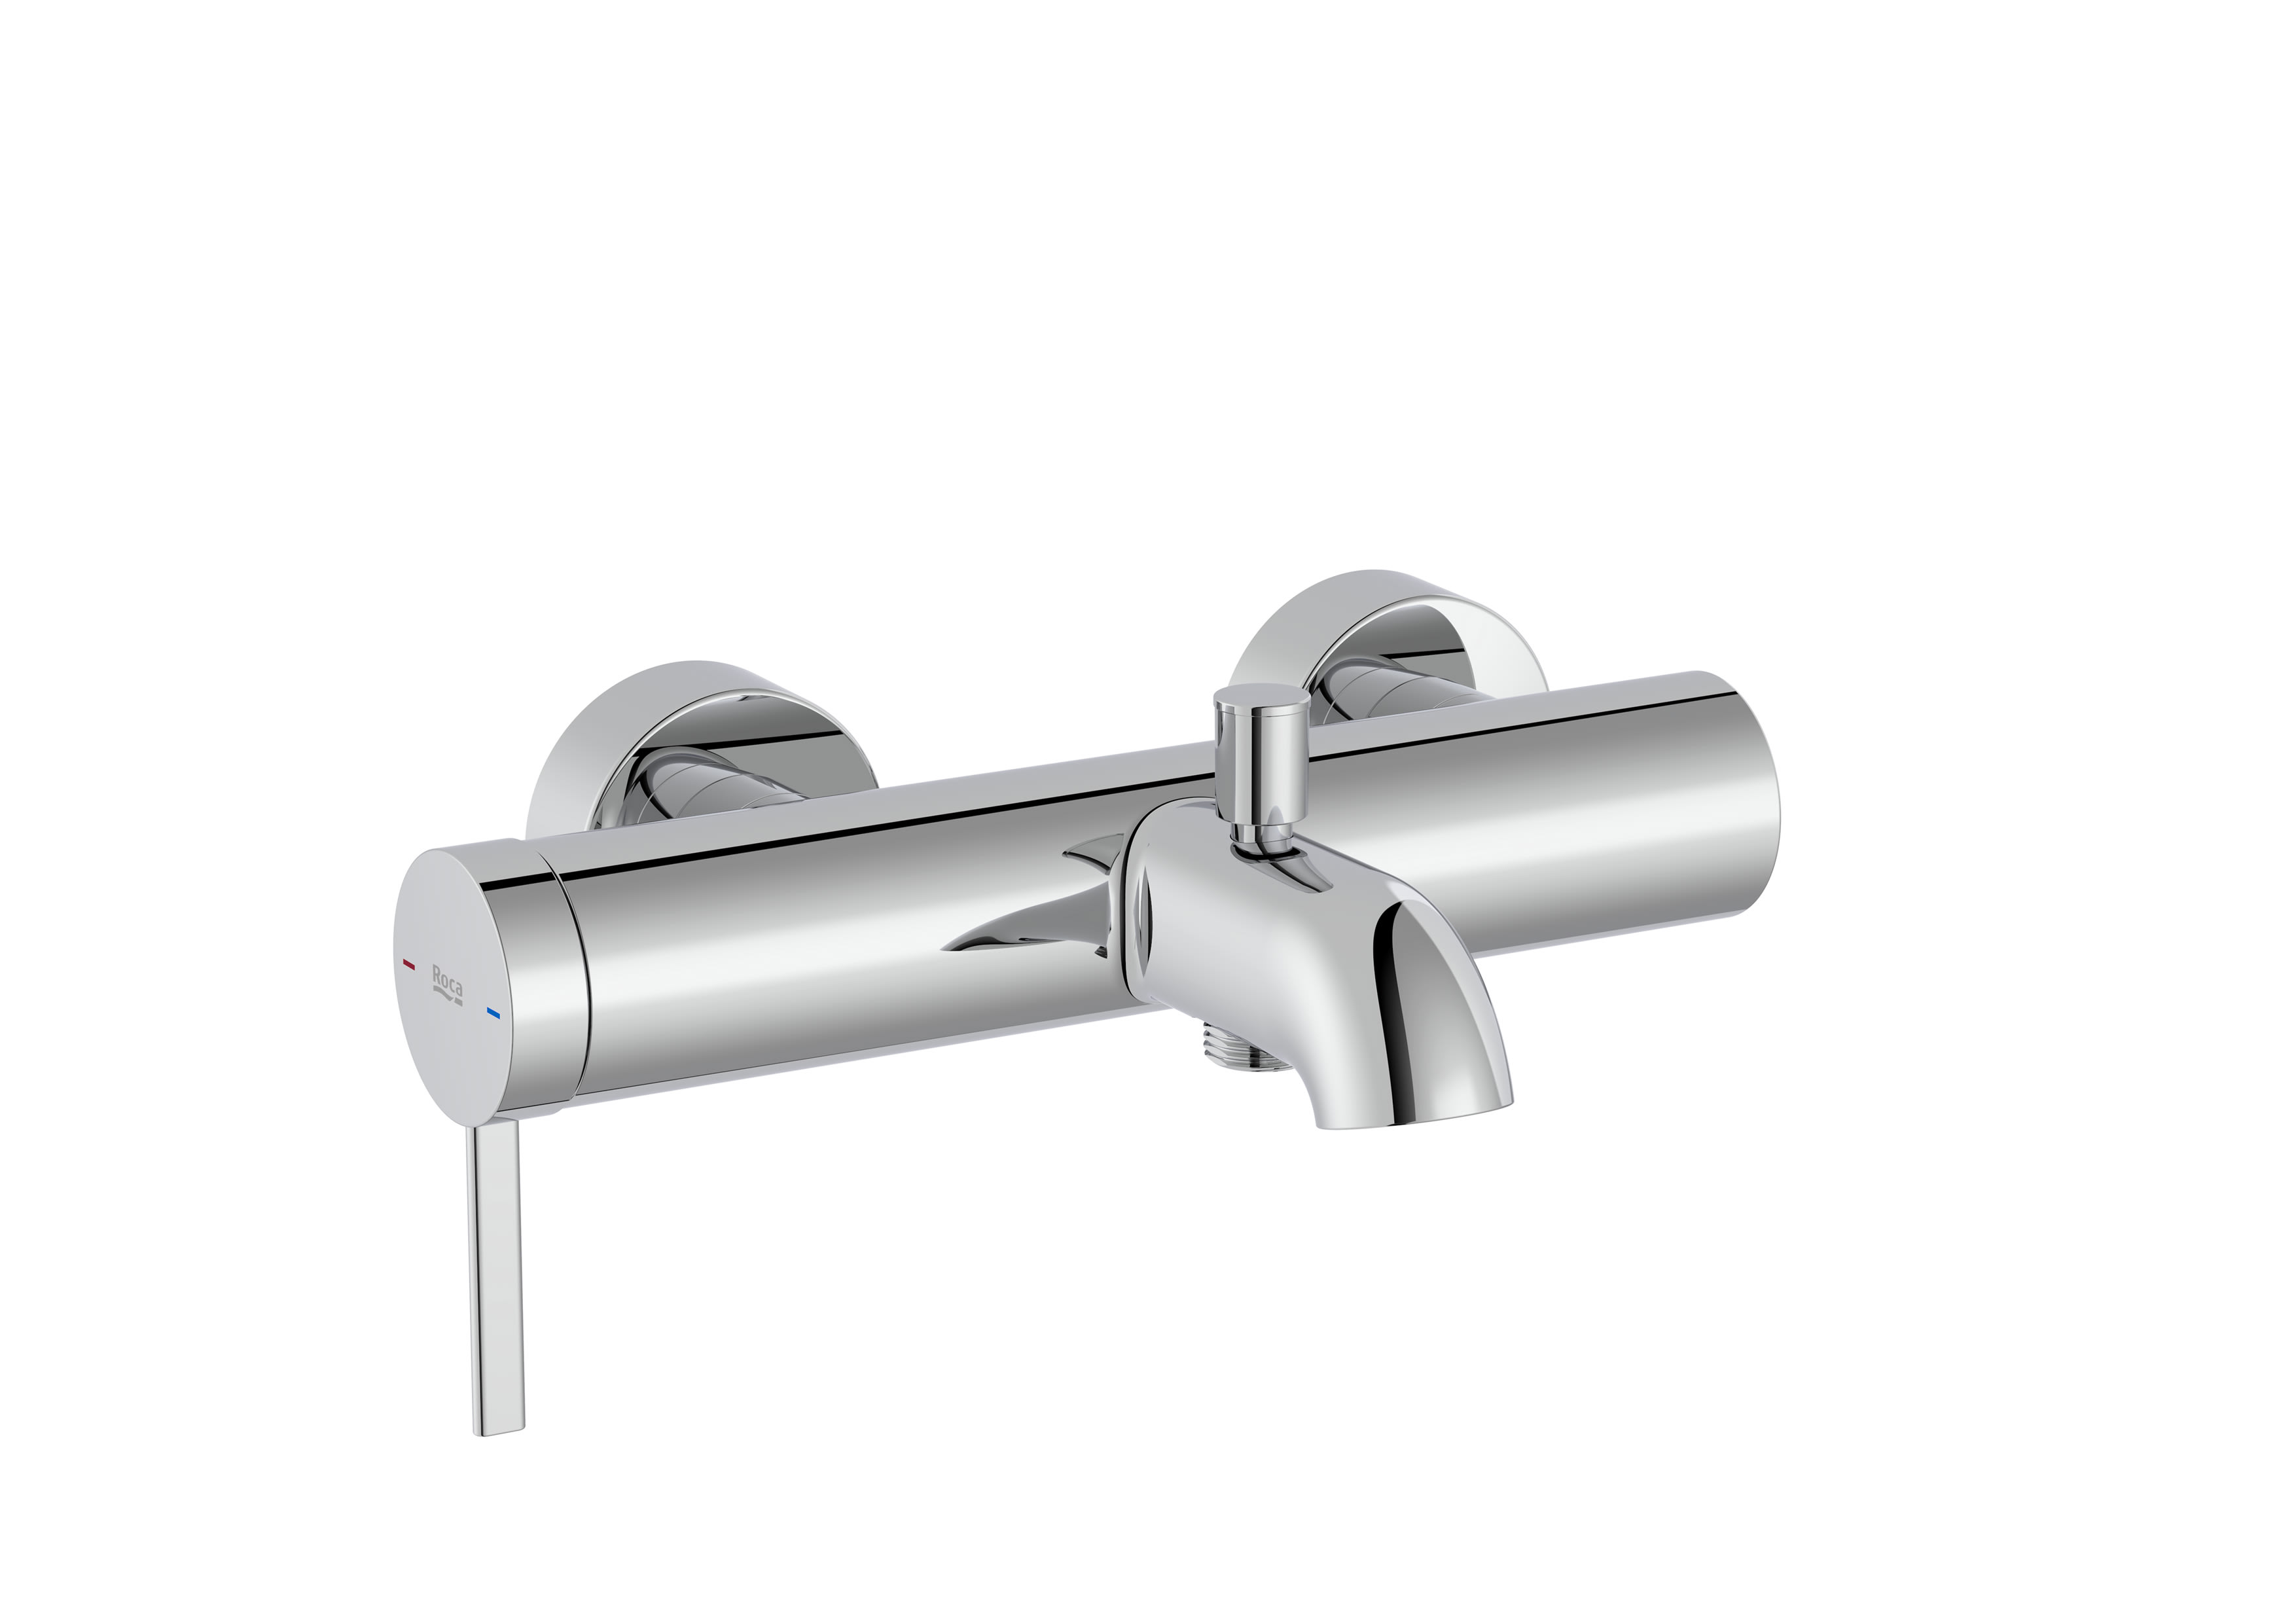 Wall-mounted bath-shower mixer with automatic diverter